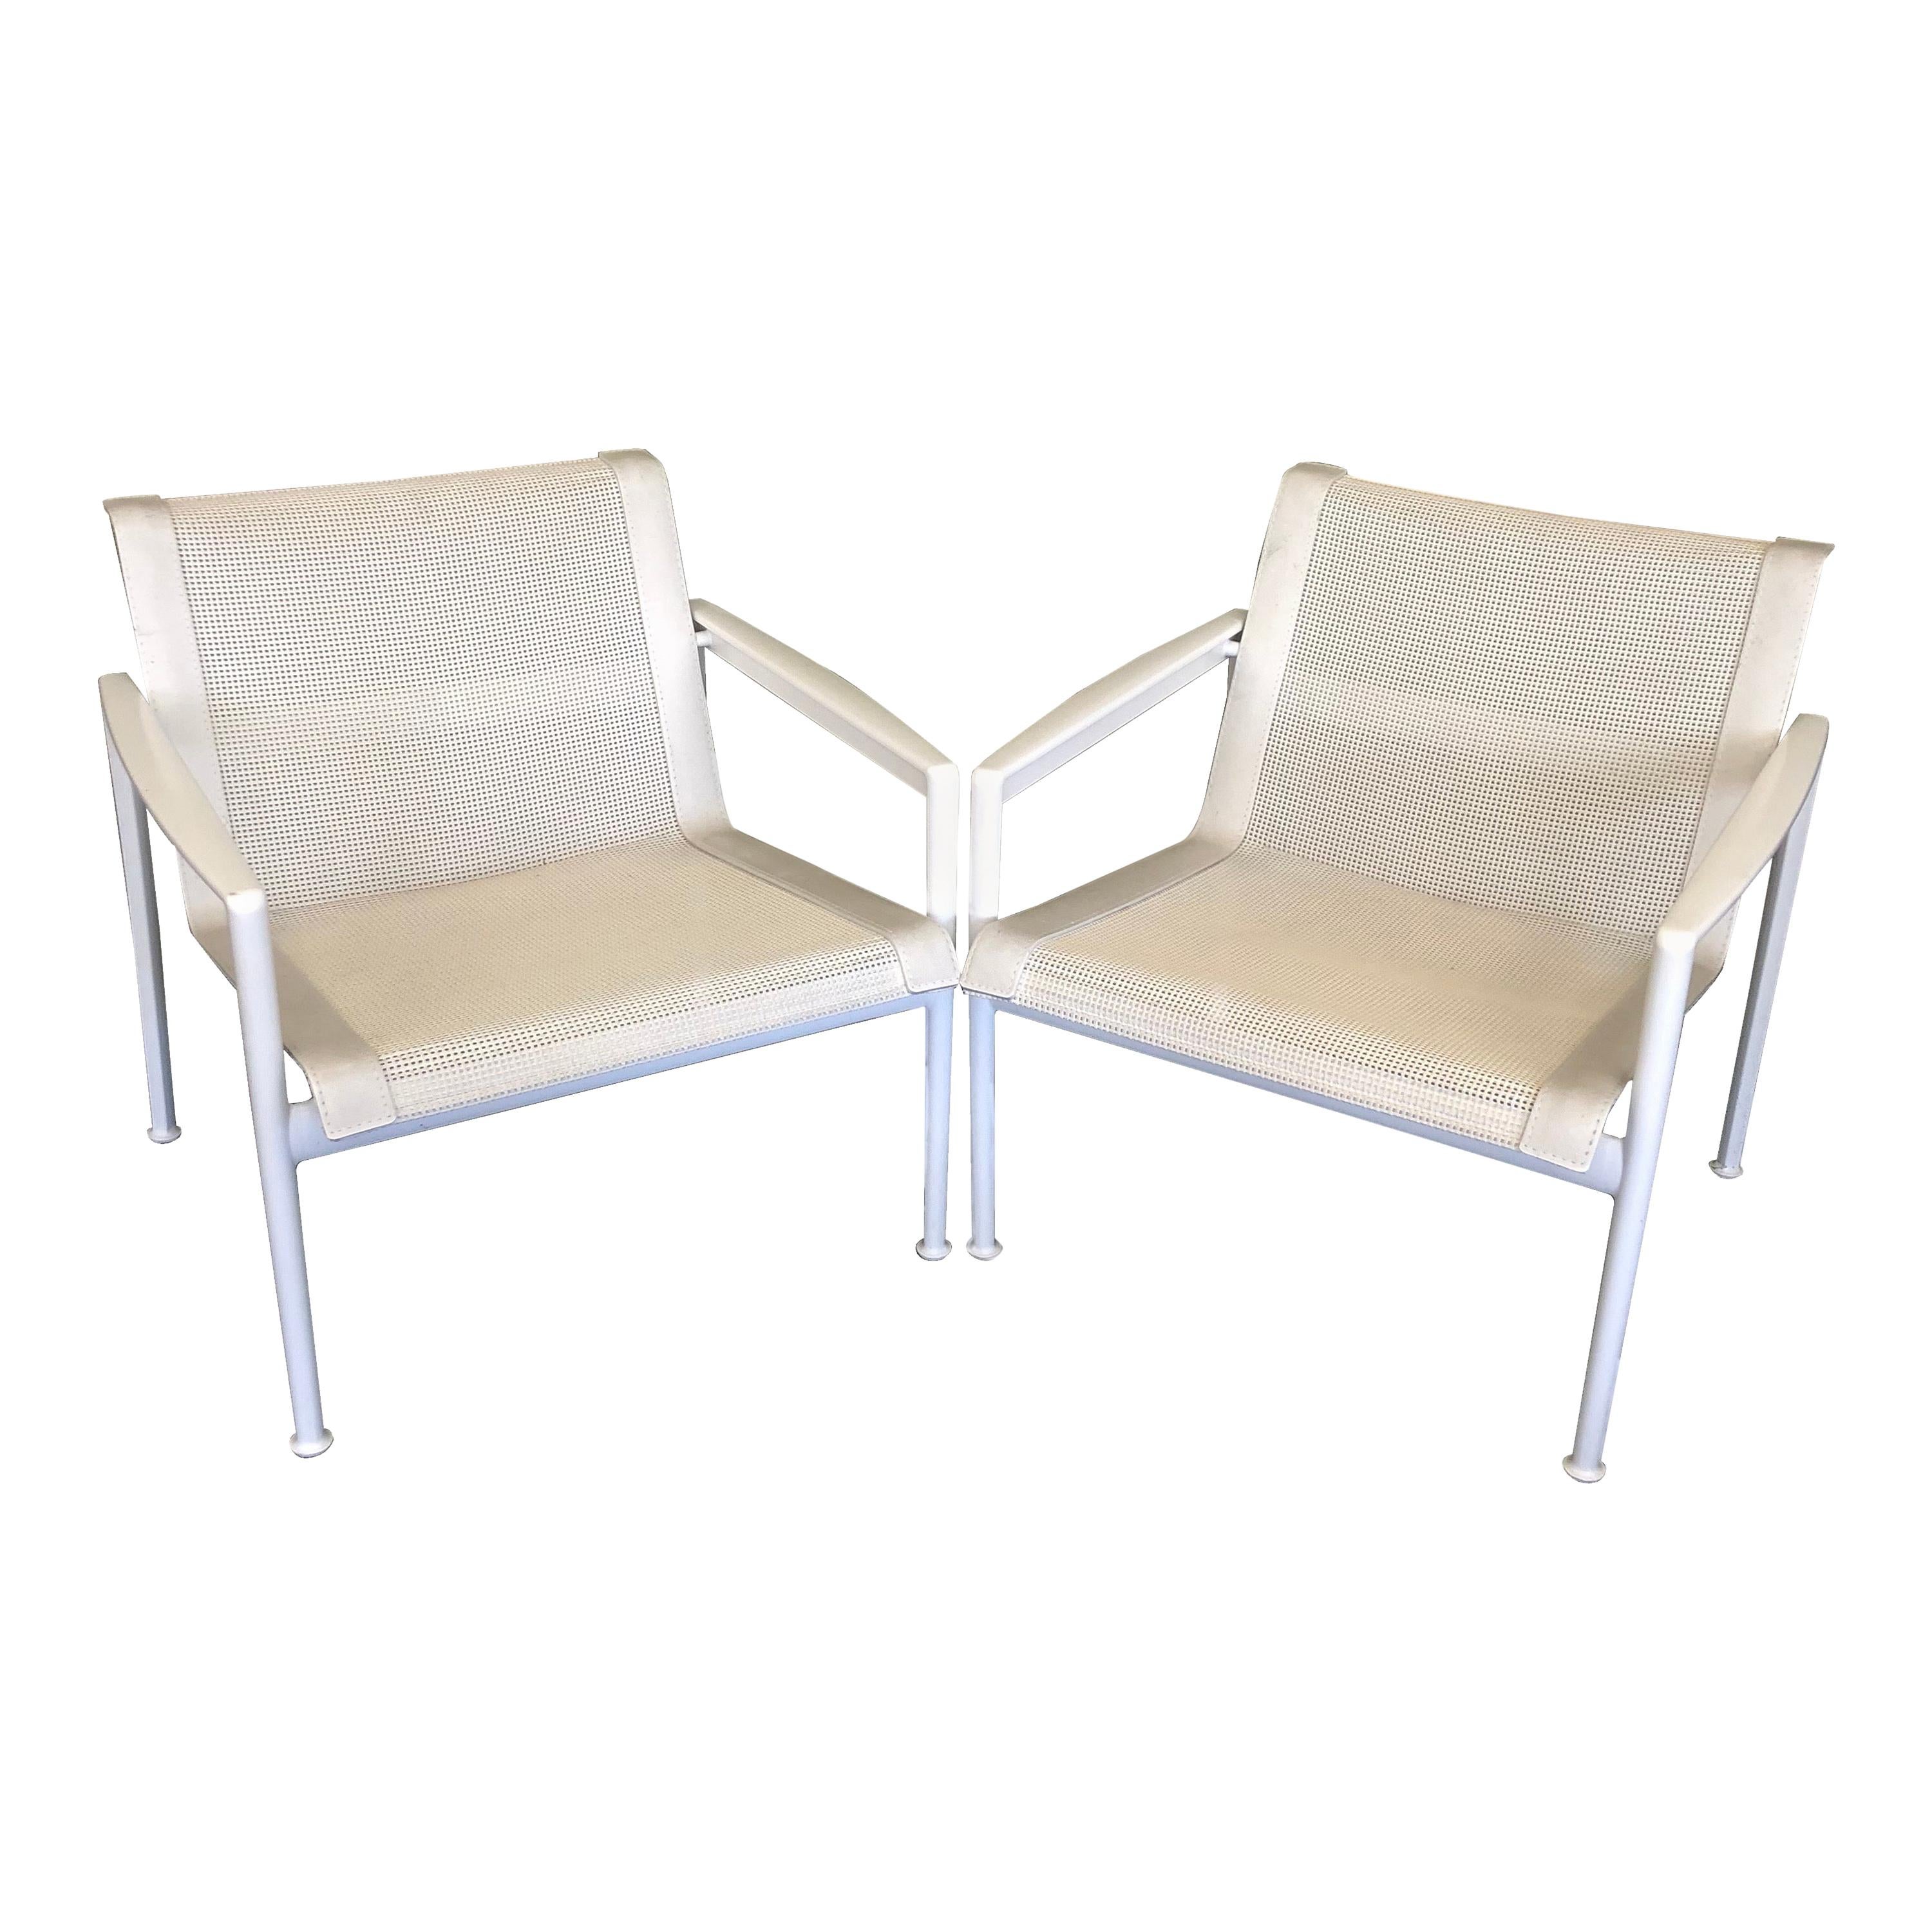 Pair of Sling Lounge Chairs by Richard Schultz for Knoll 1966 Collection